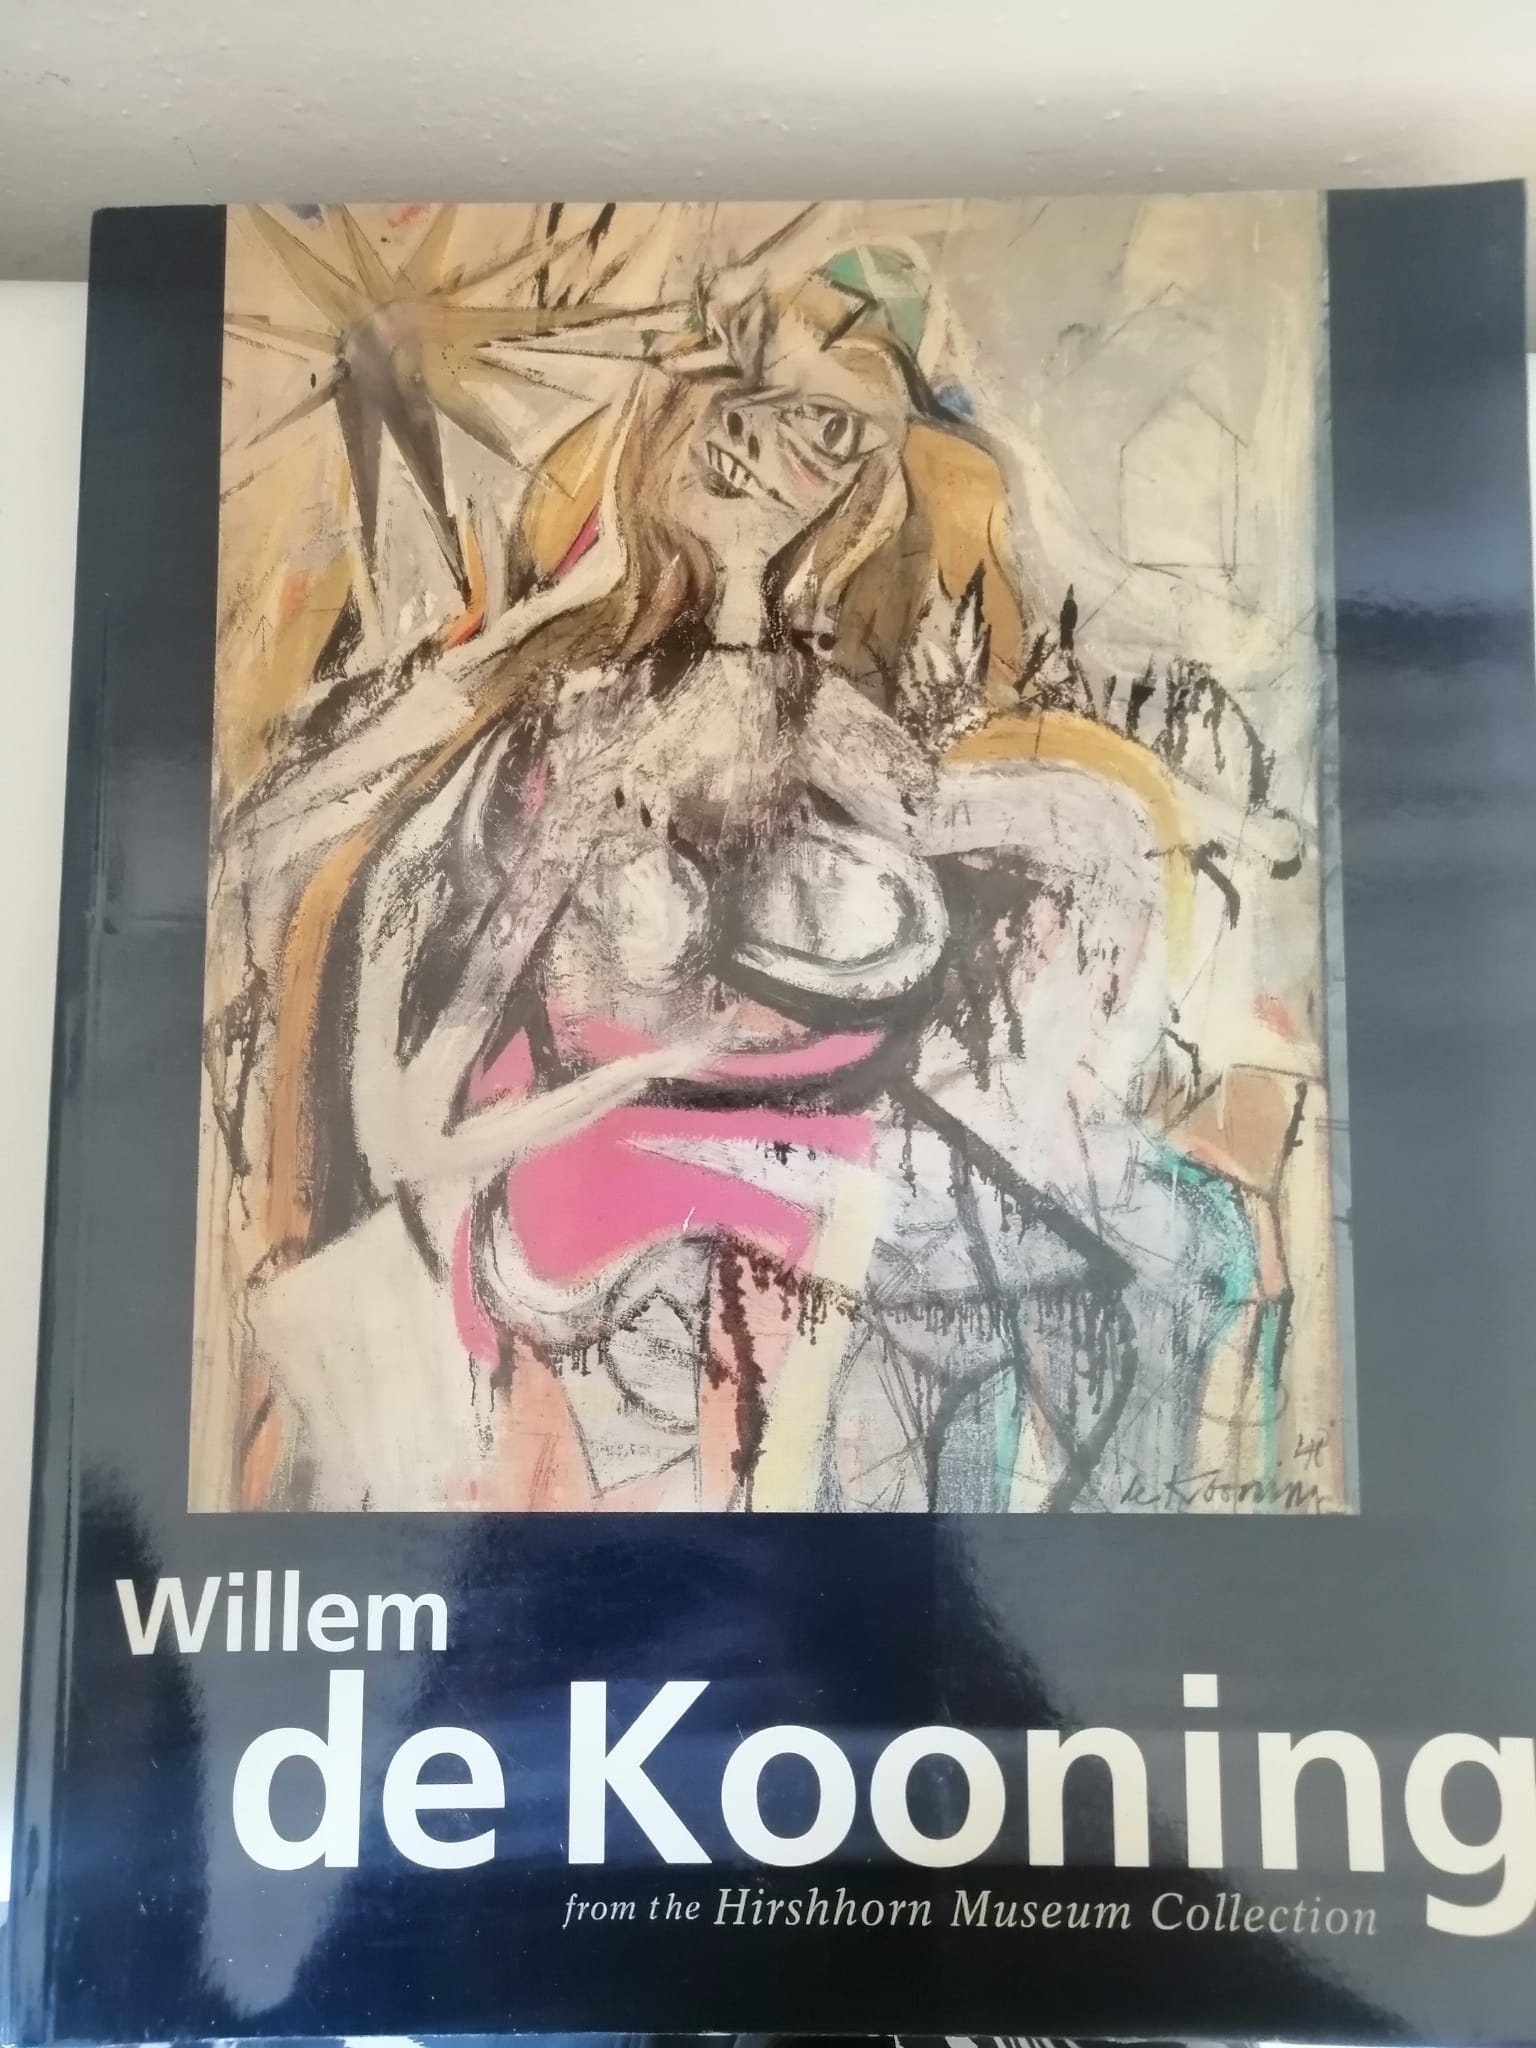 WILLEM DE KOONING from the Hirshhorn Museum Collection